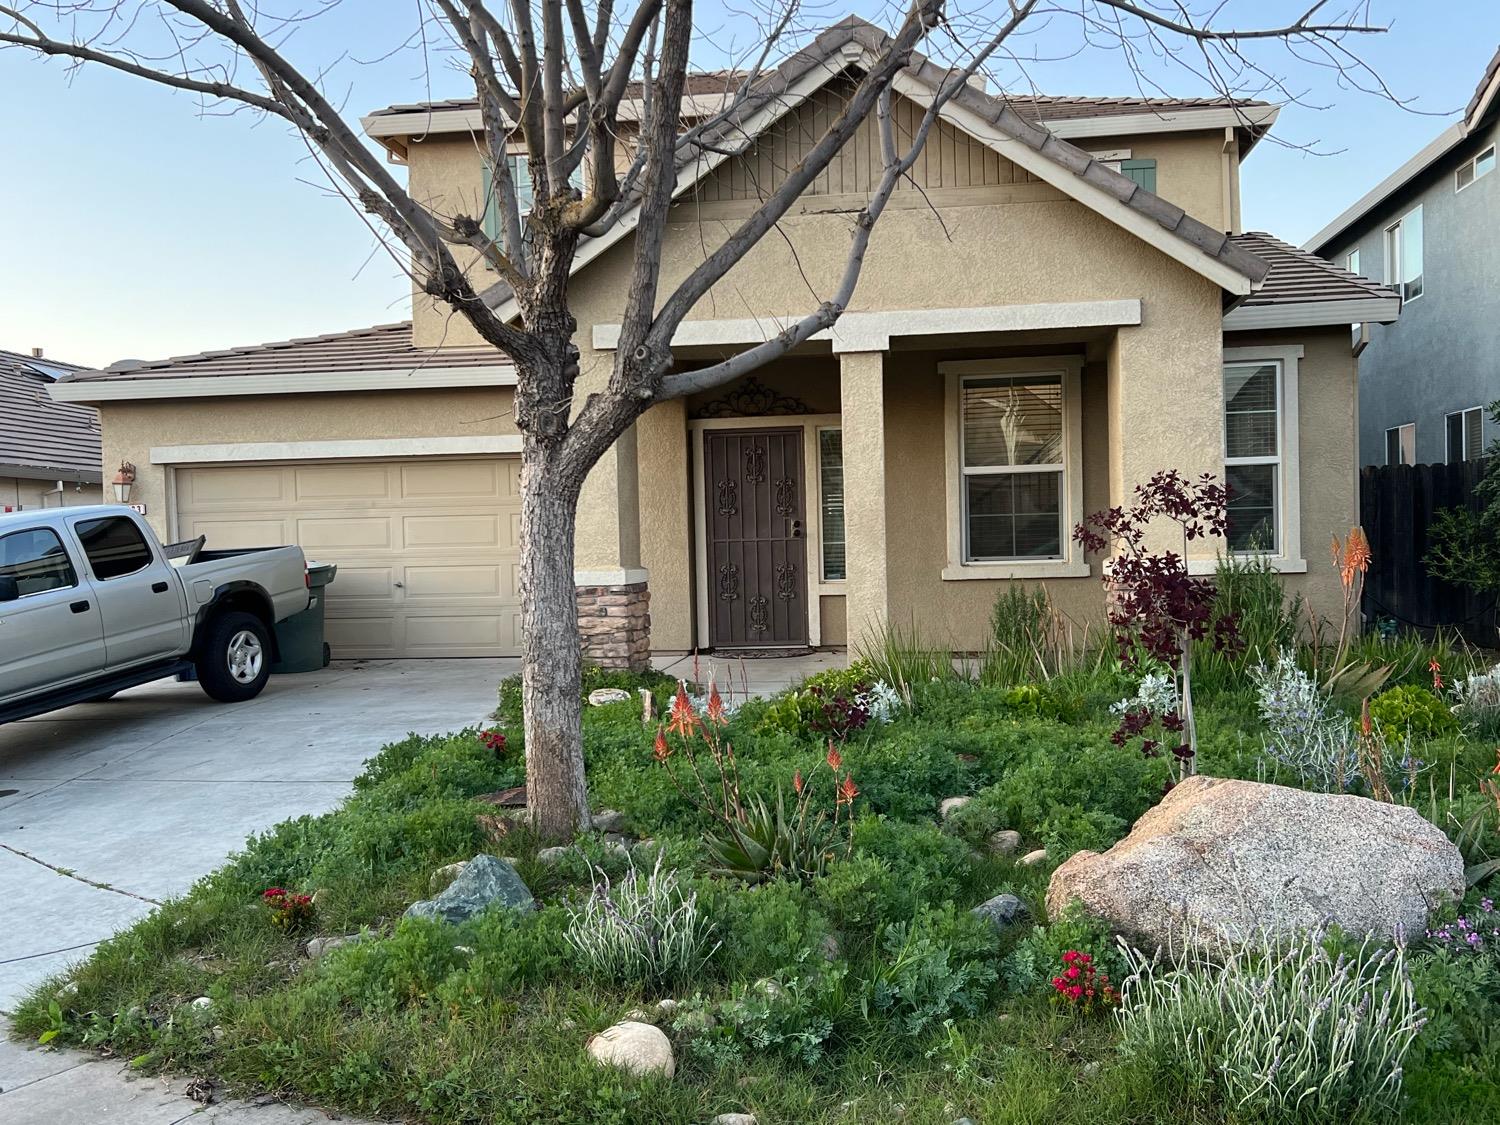 Photo of 1383 Baxter Ct in Merced, CA